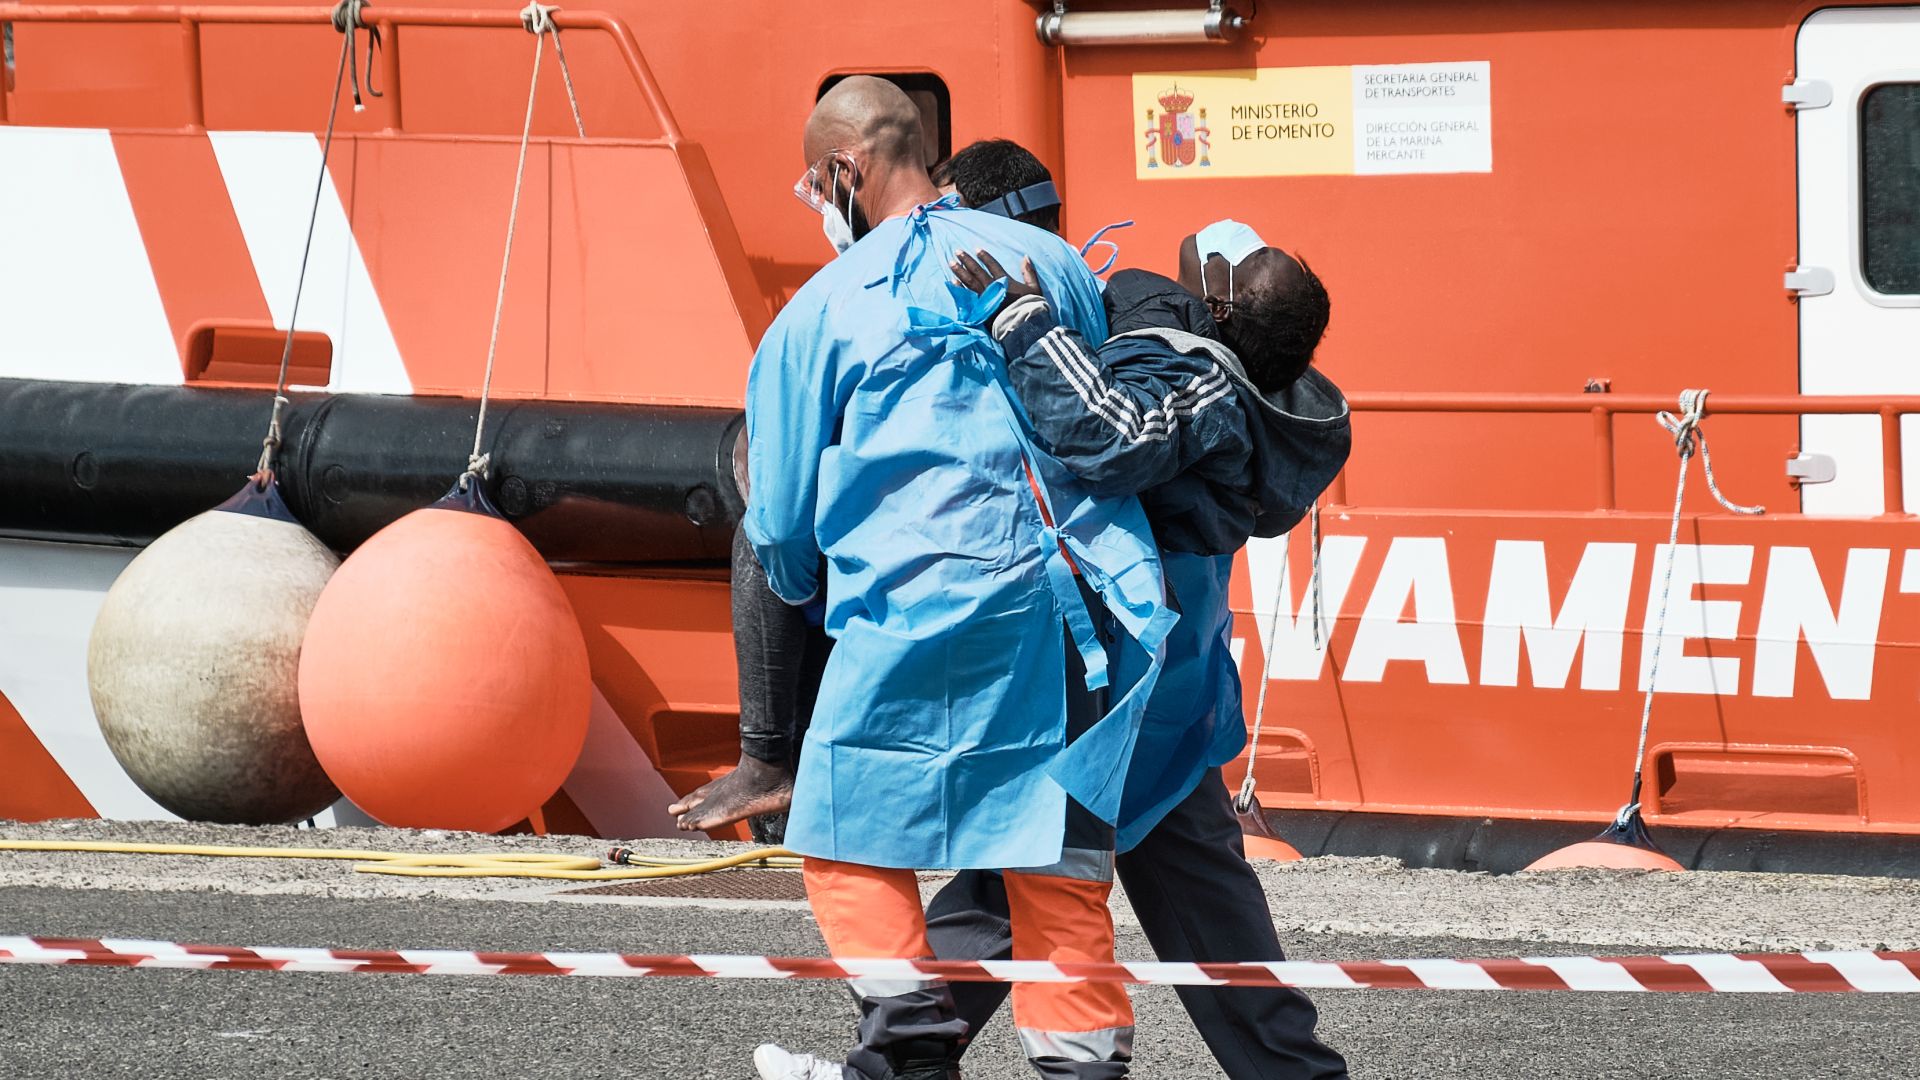 A photo of a woman being helped by Red Cross staff after a rescue vessel came ashore in Arguineguin, Gran Canaria.